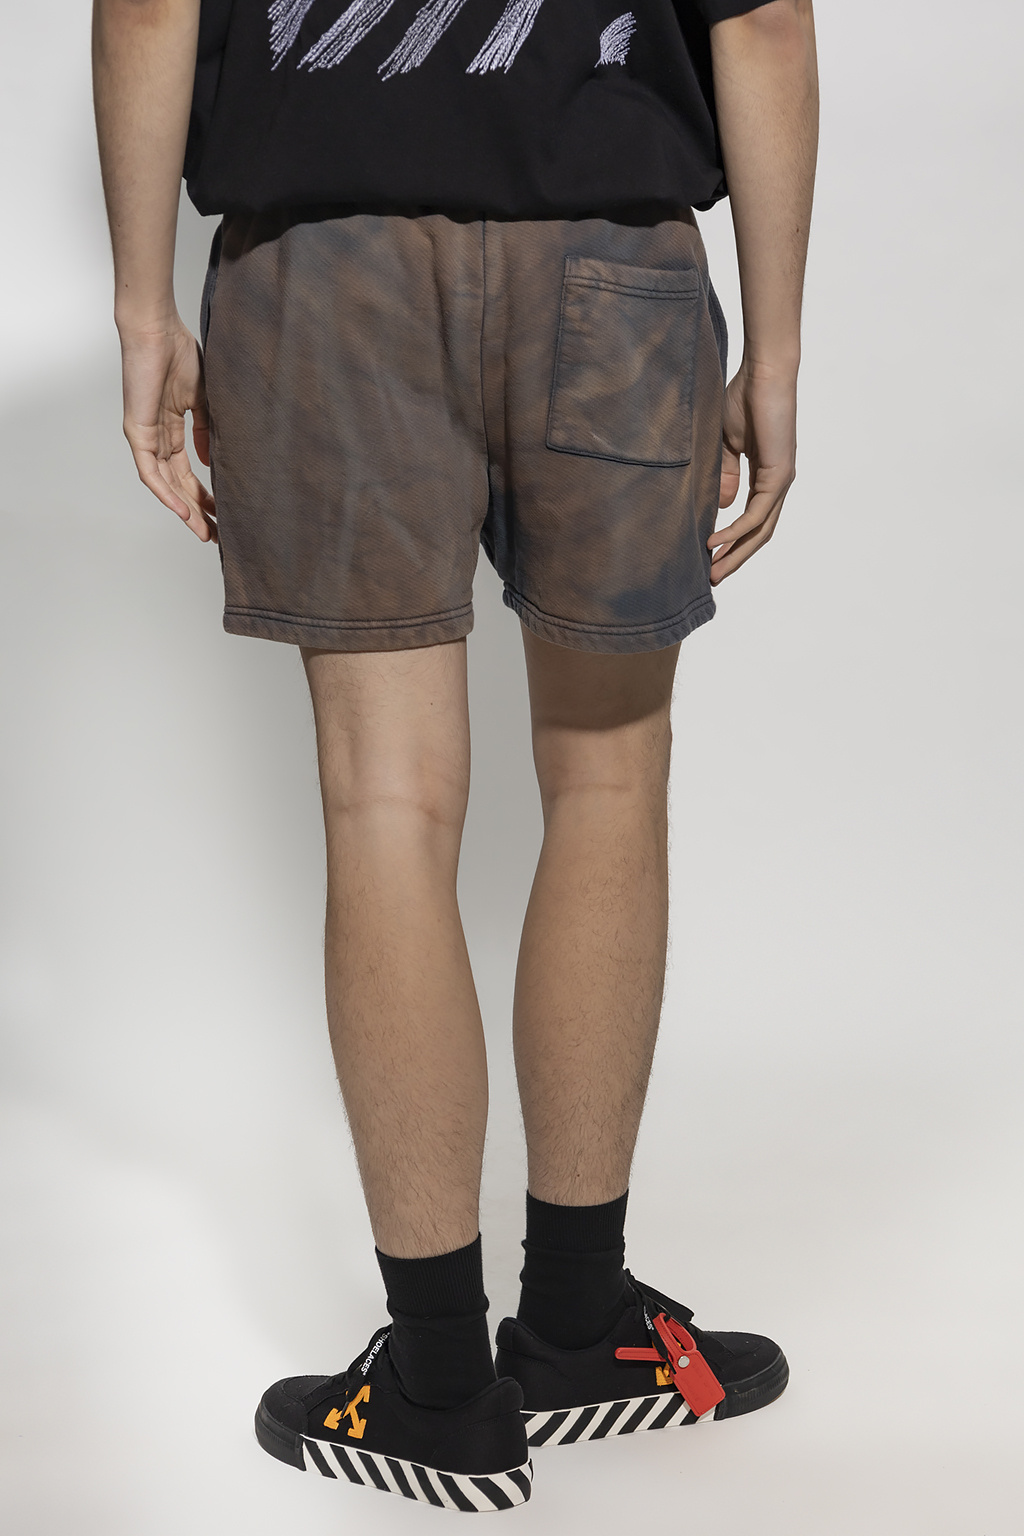 Off-White MSGM Performance Shorts for Women